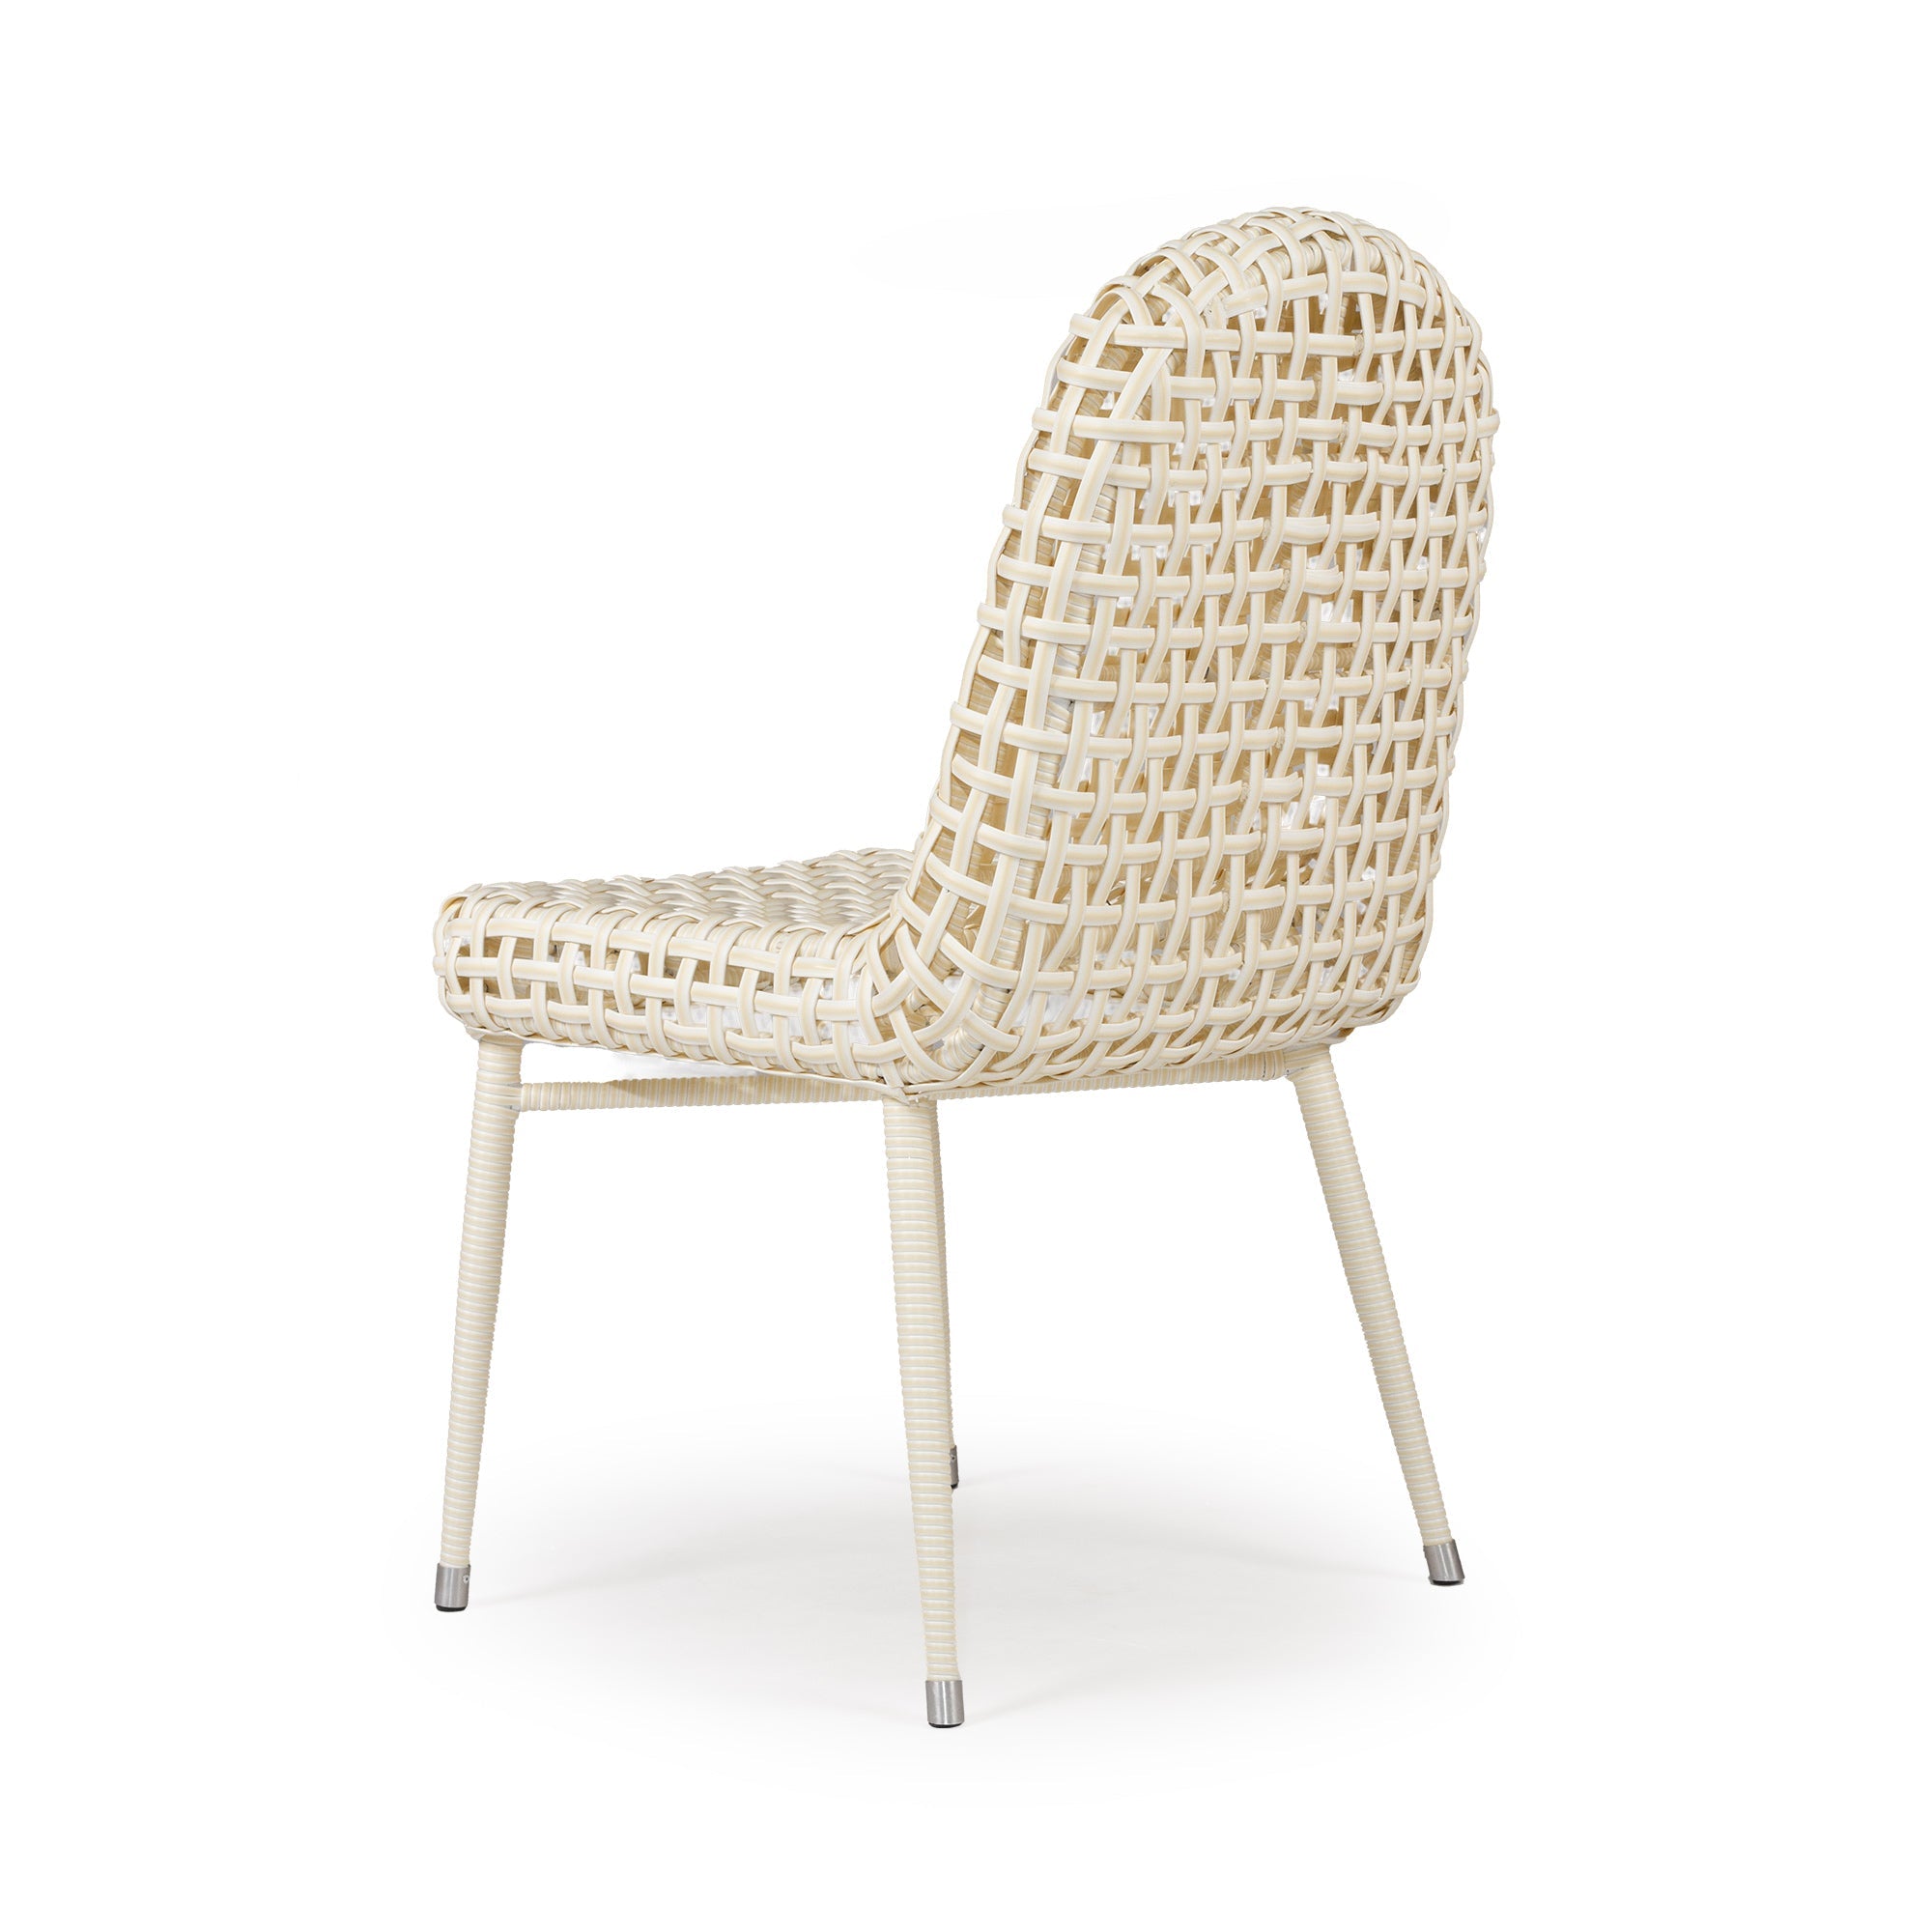 Remy Wicker Outdoor Dining Chair - Beach White - Notbrand